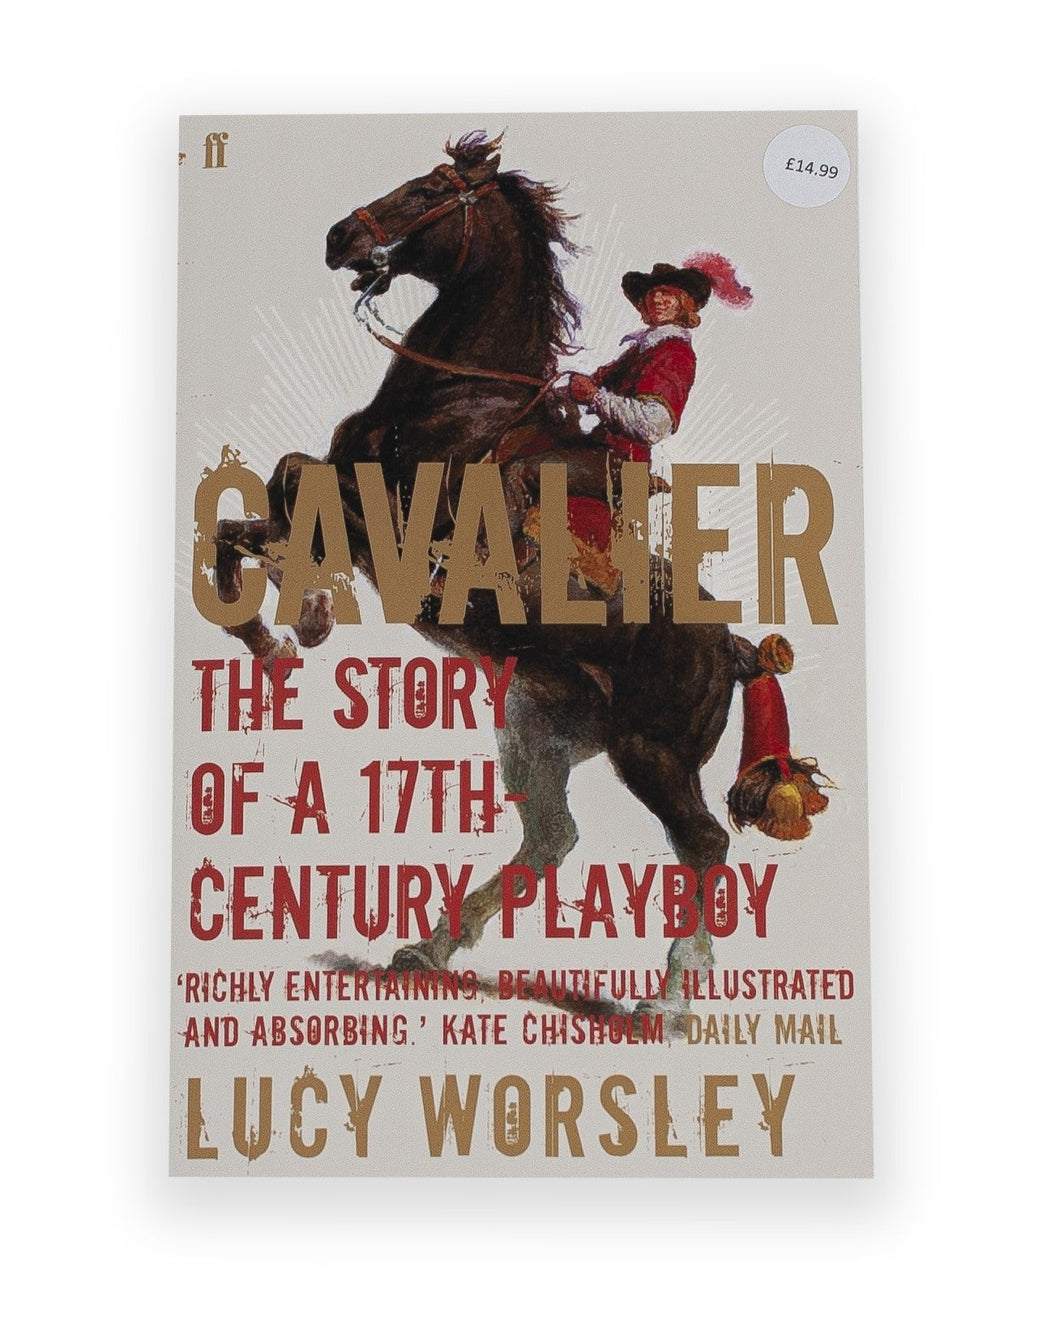 Lucy Worsley - Cavalier: The Story of a 17th Century Playboy for sale at the Harley Gallery online shop